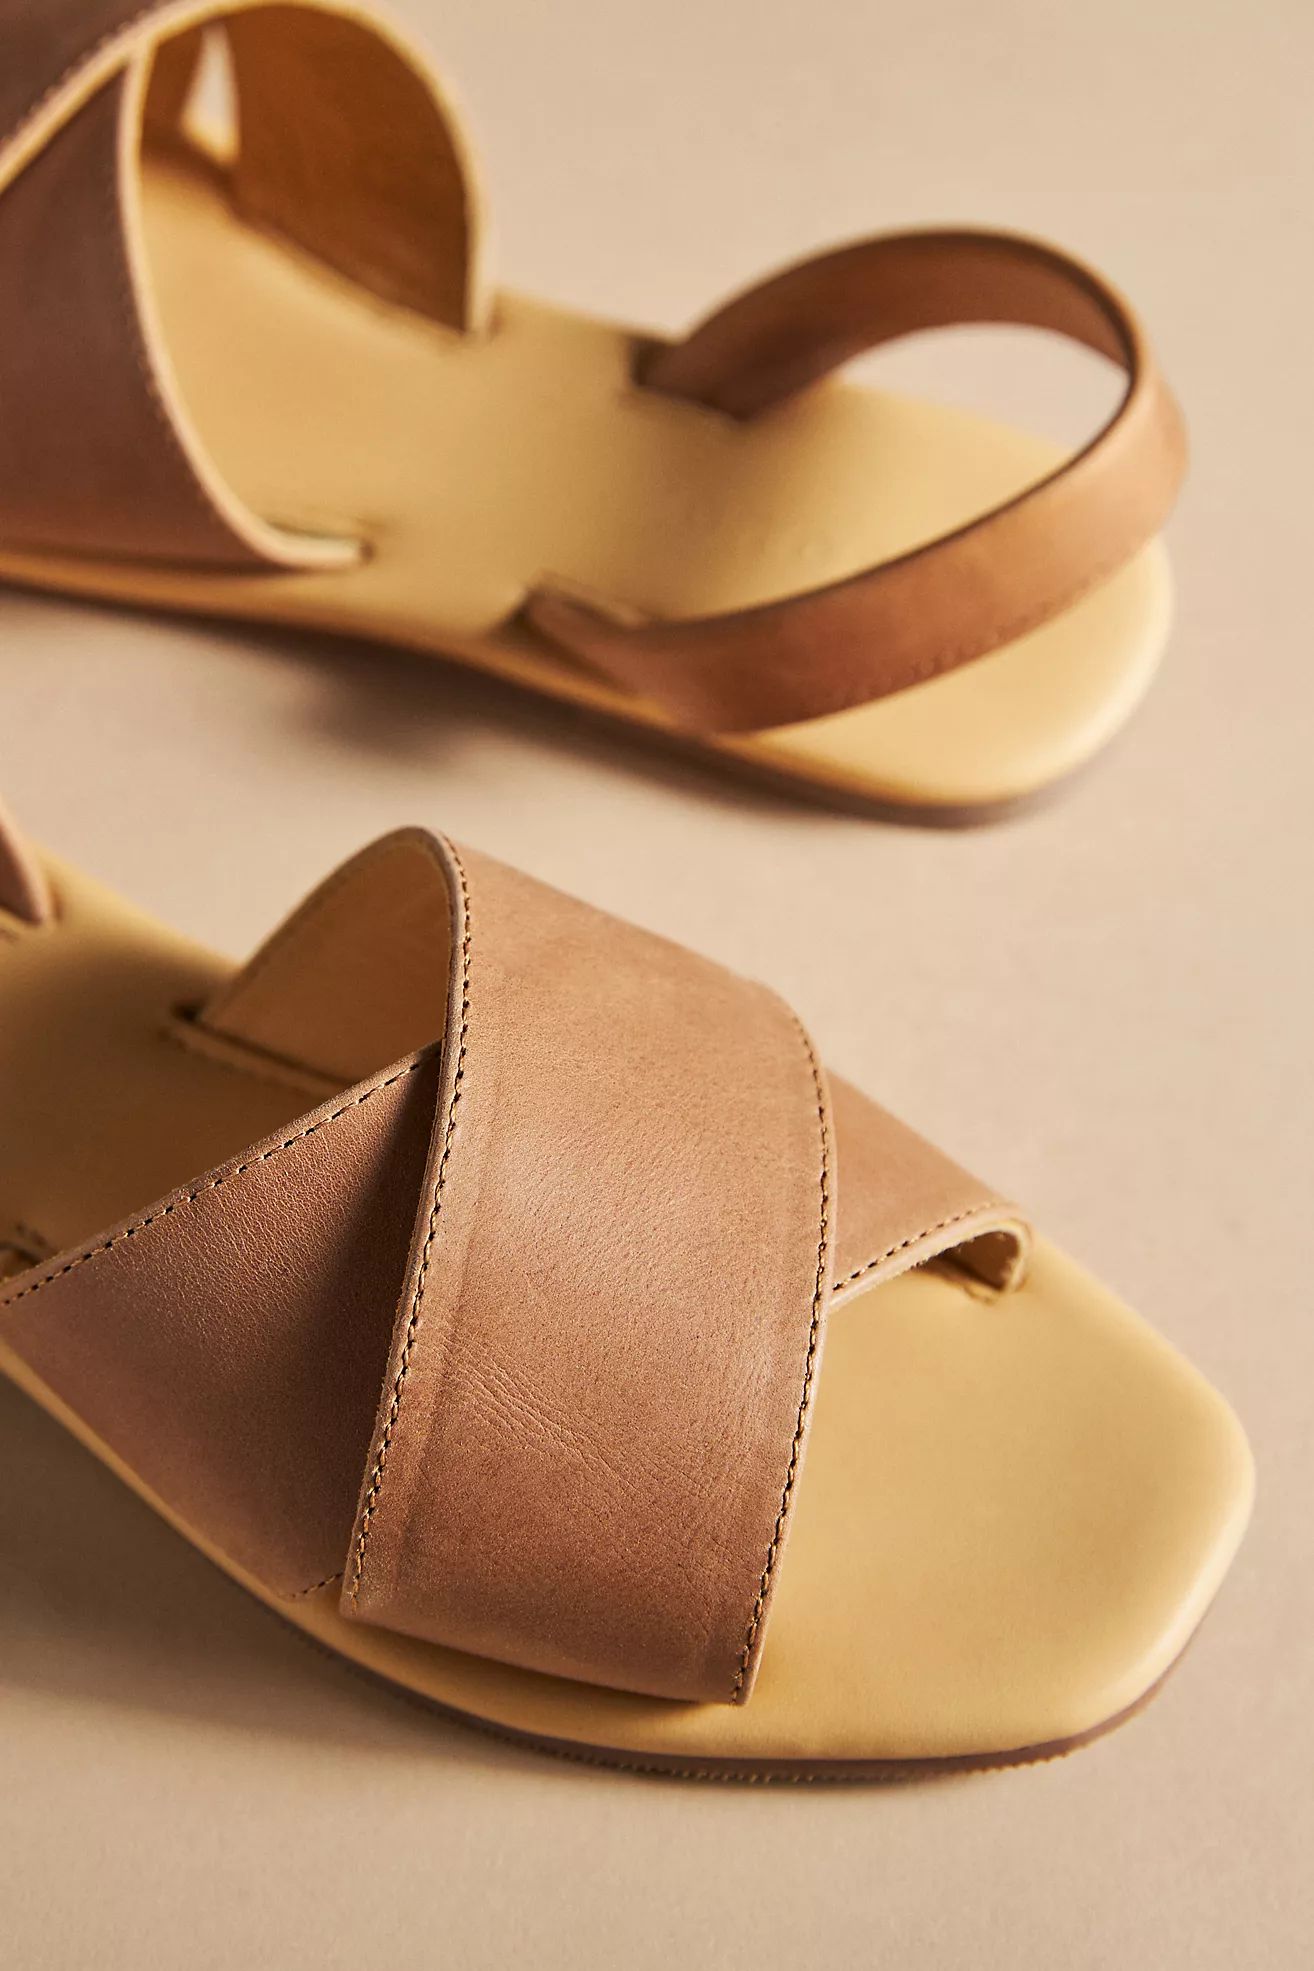 Nisolo All-Day Cross Strap Sandals | Anthropologie (US)